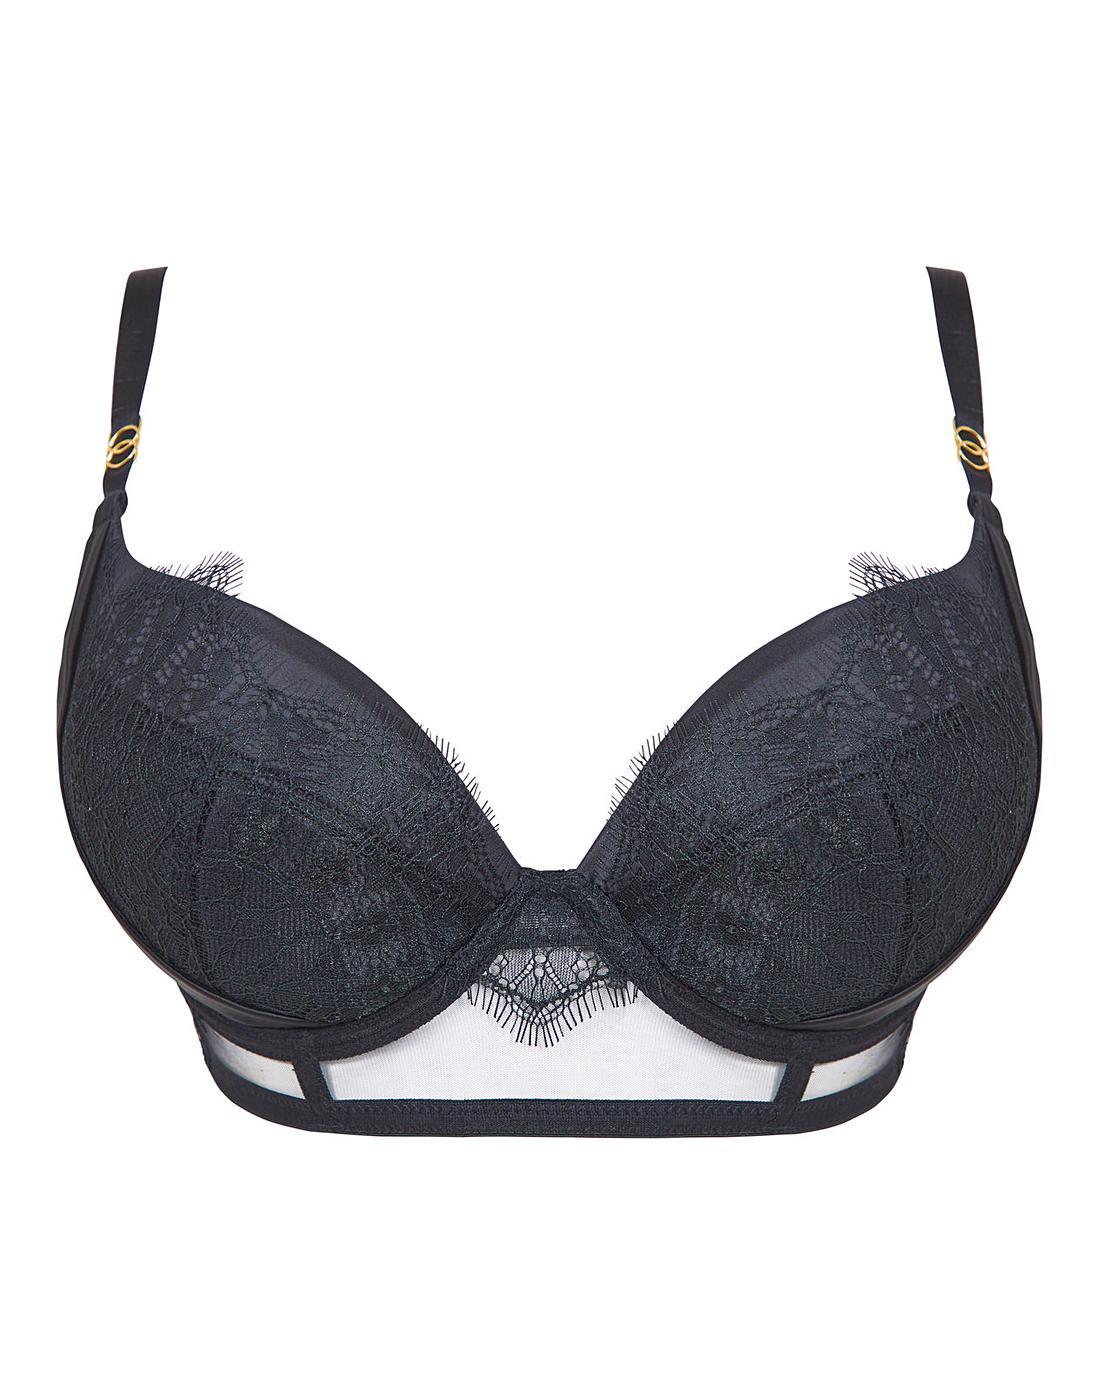 Ann Summers Siren Lace Plunge Bra | Oxendales